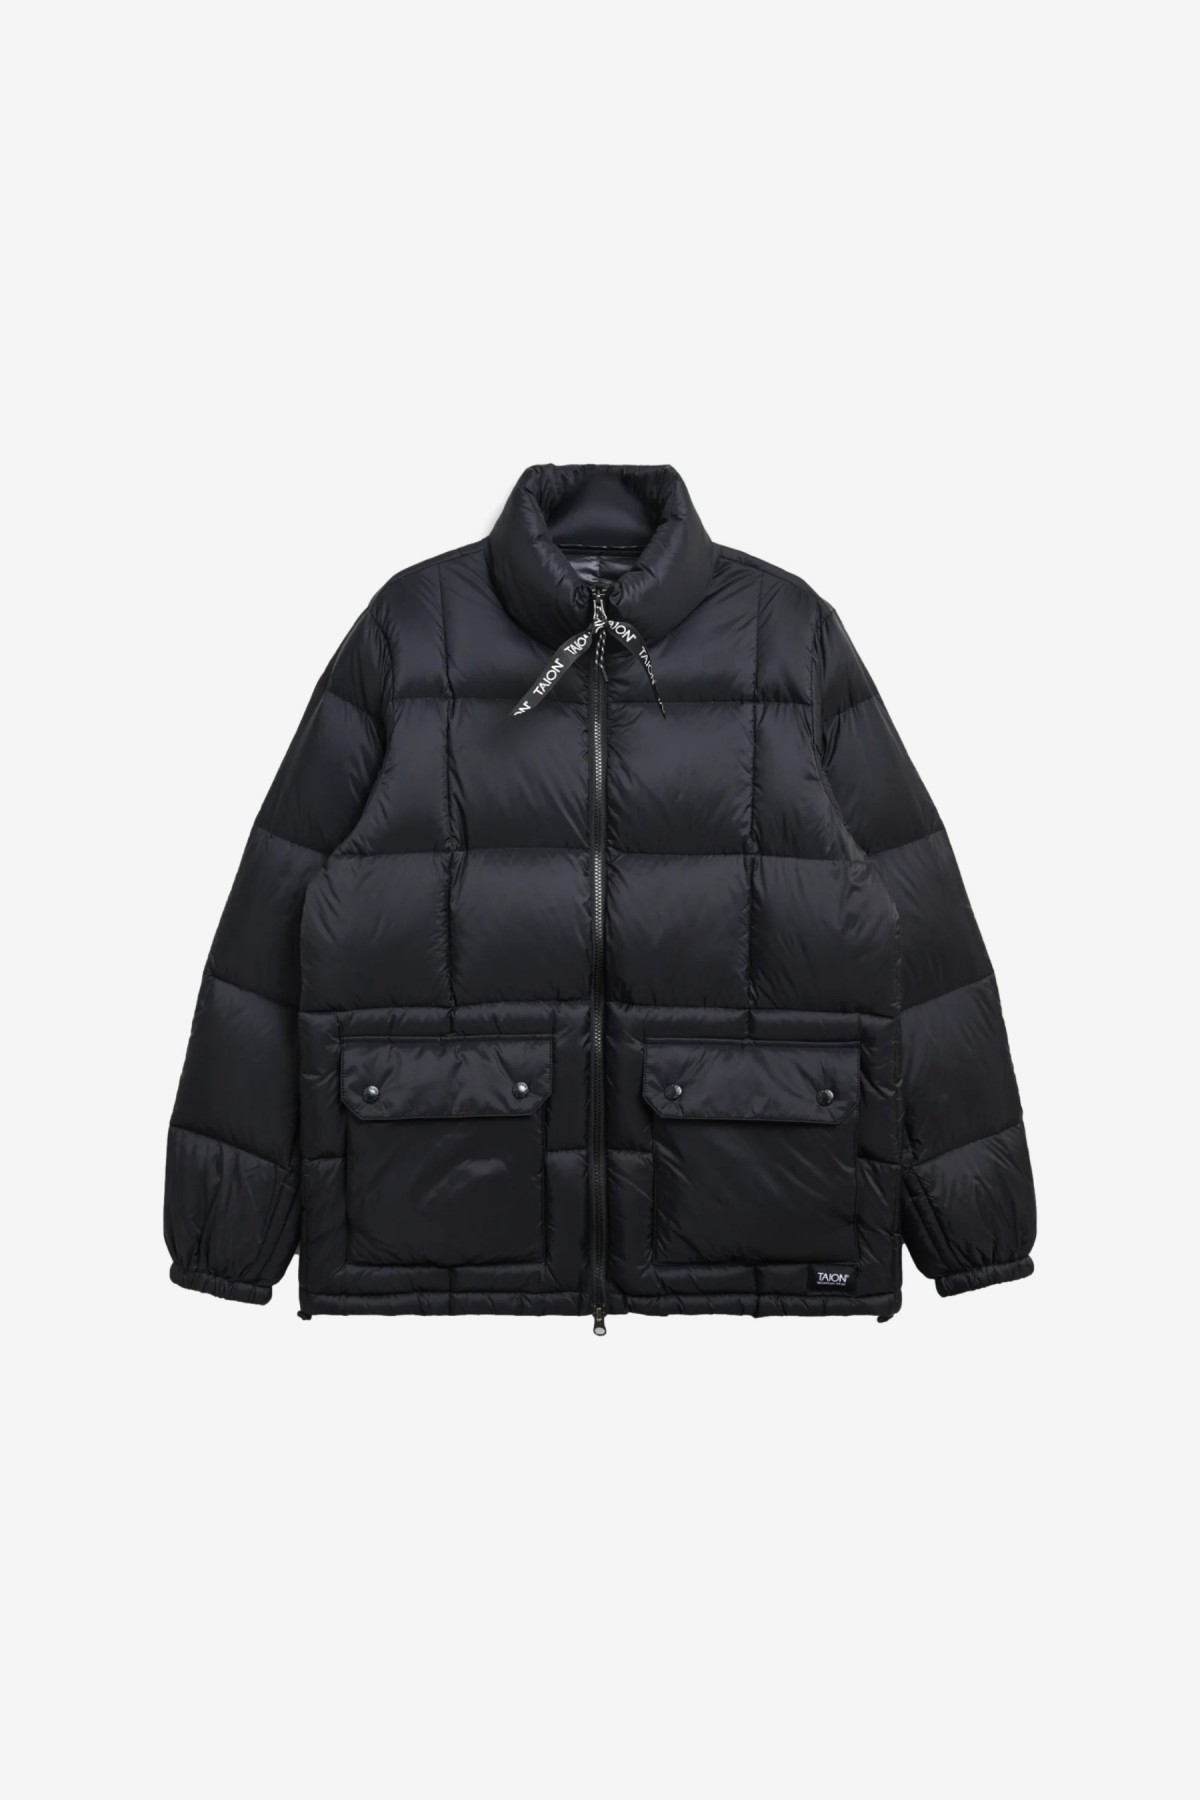 Taion Mountain Packable Volume Down Jacket in Black